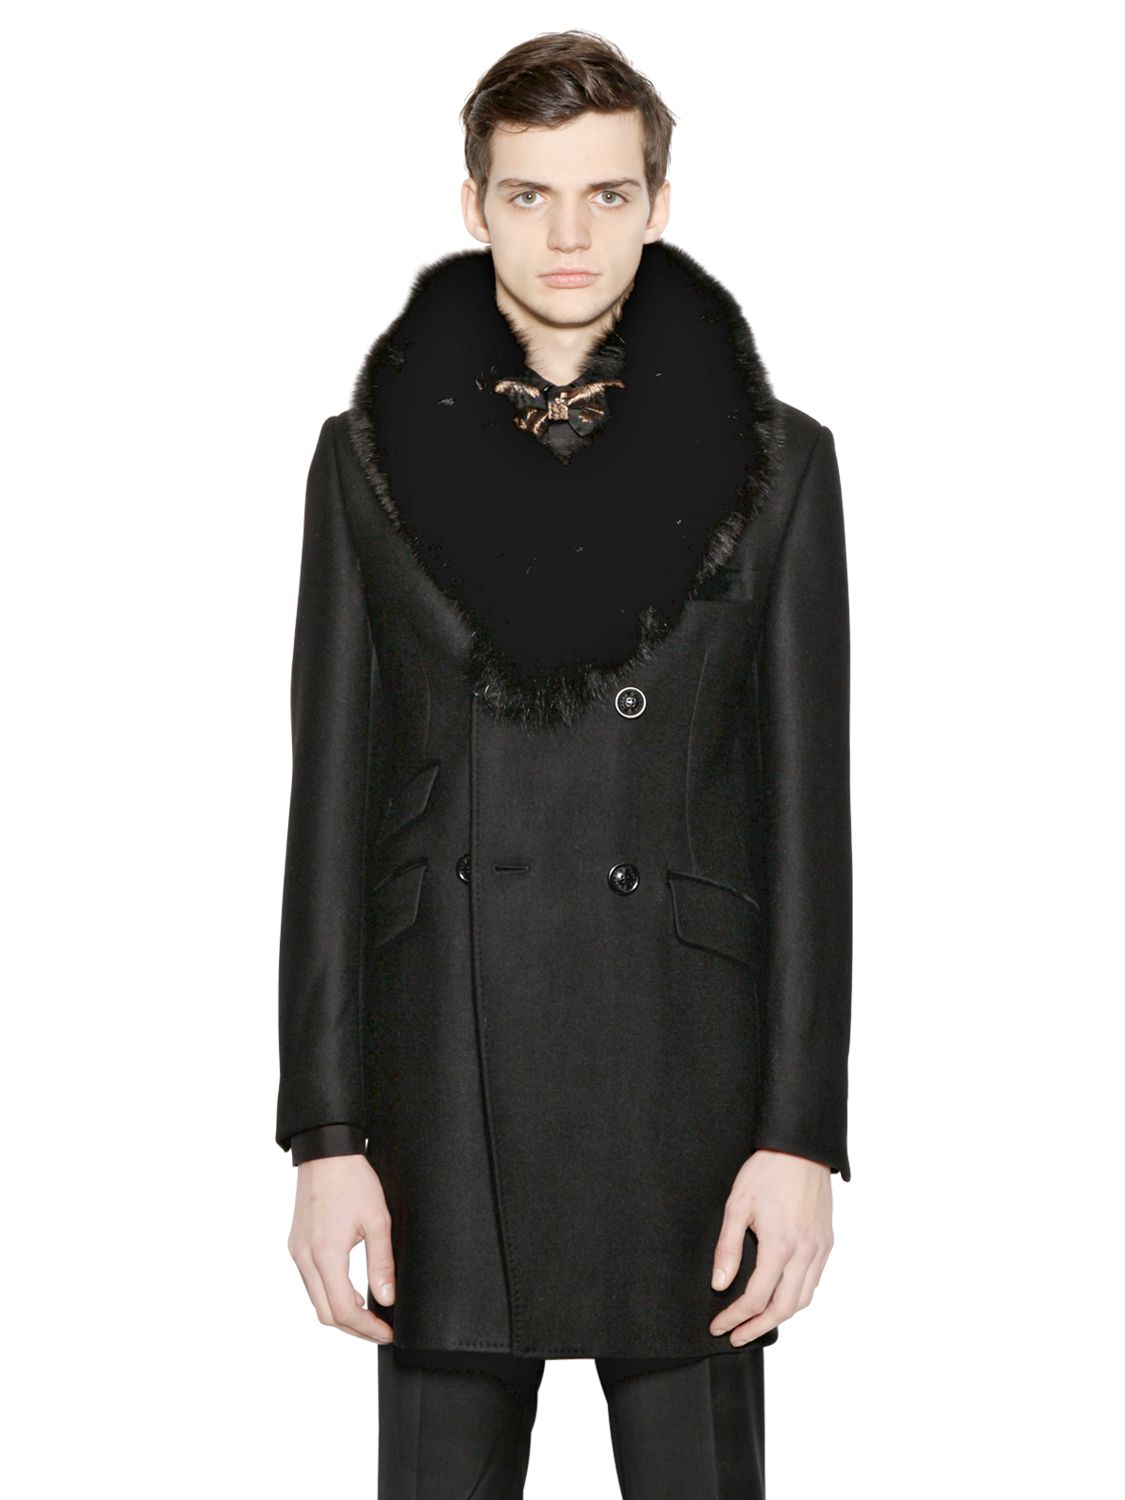 Lyst - Lords & Fools Wool Blend Coat With Fox Fur Collar in Black for Men